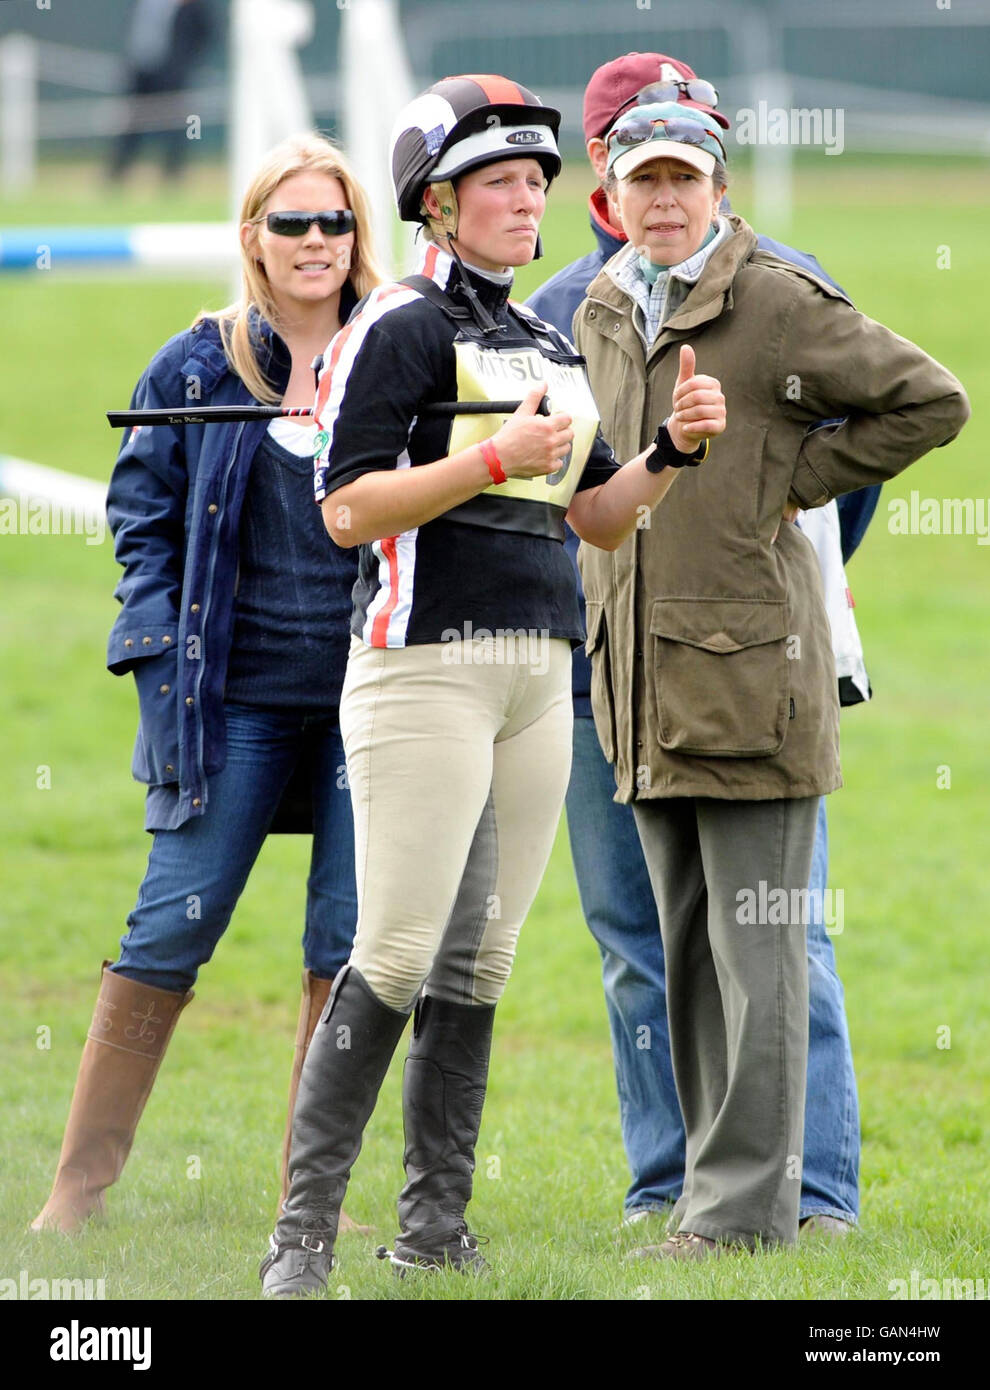 Zara Phillips stands with the Princess Royal, Autumn Kelly and Peter  Phillips (hidden) after finishing the cross country course on Glenbuck with  total penalty points of 57.2 at the Mitsubishi Motors Badminton